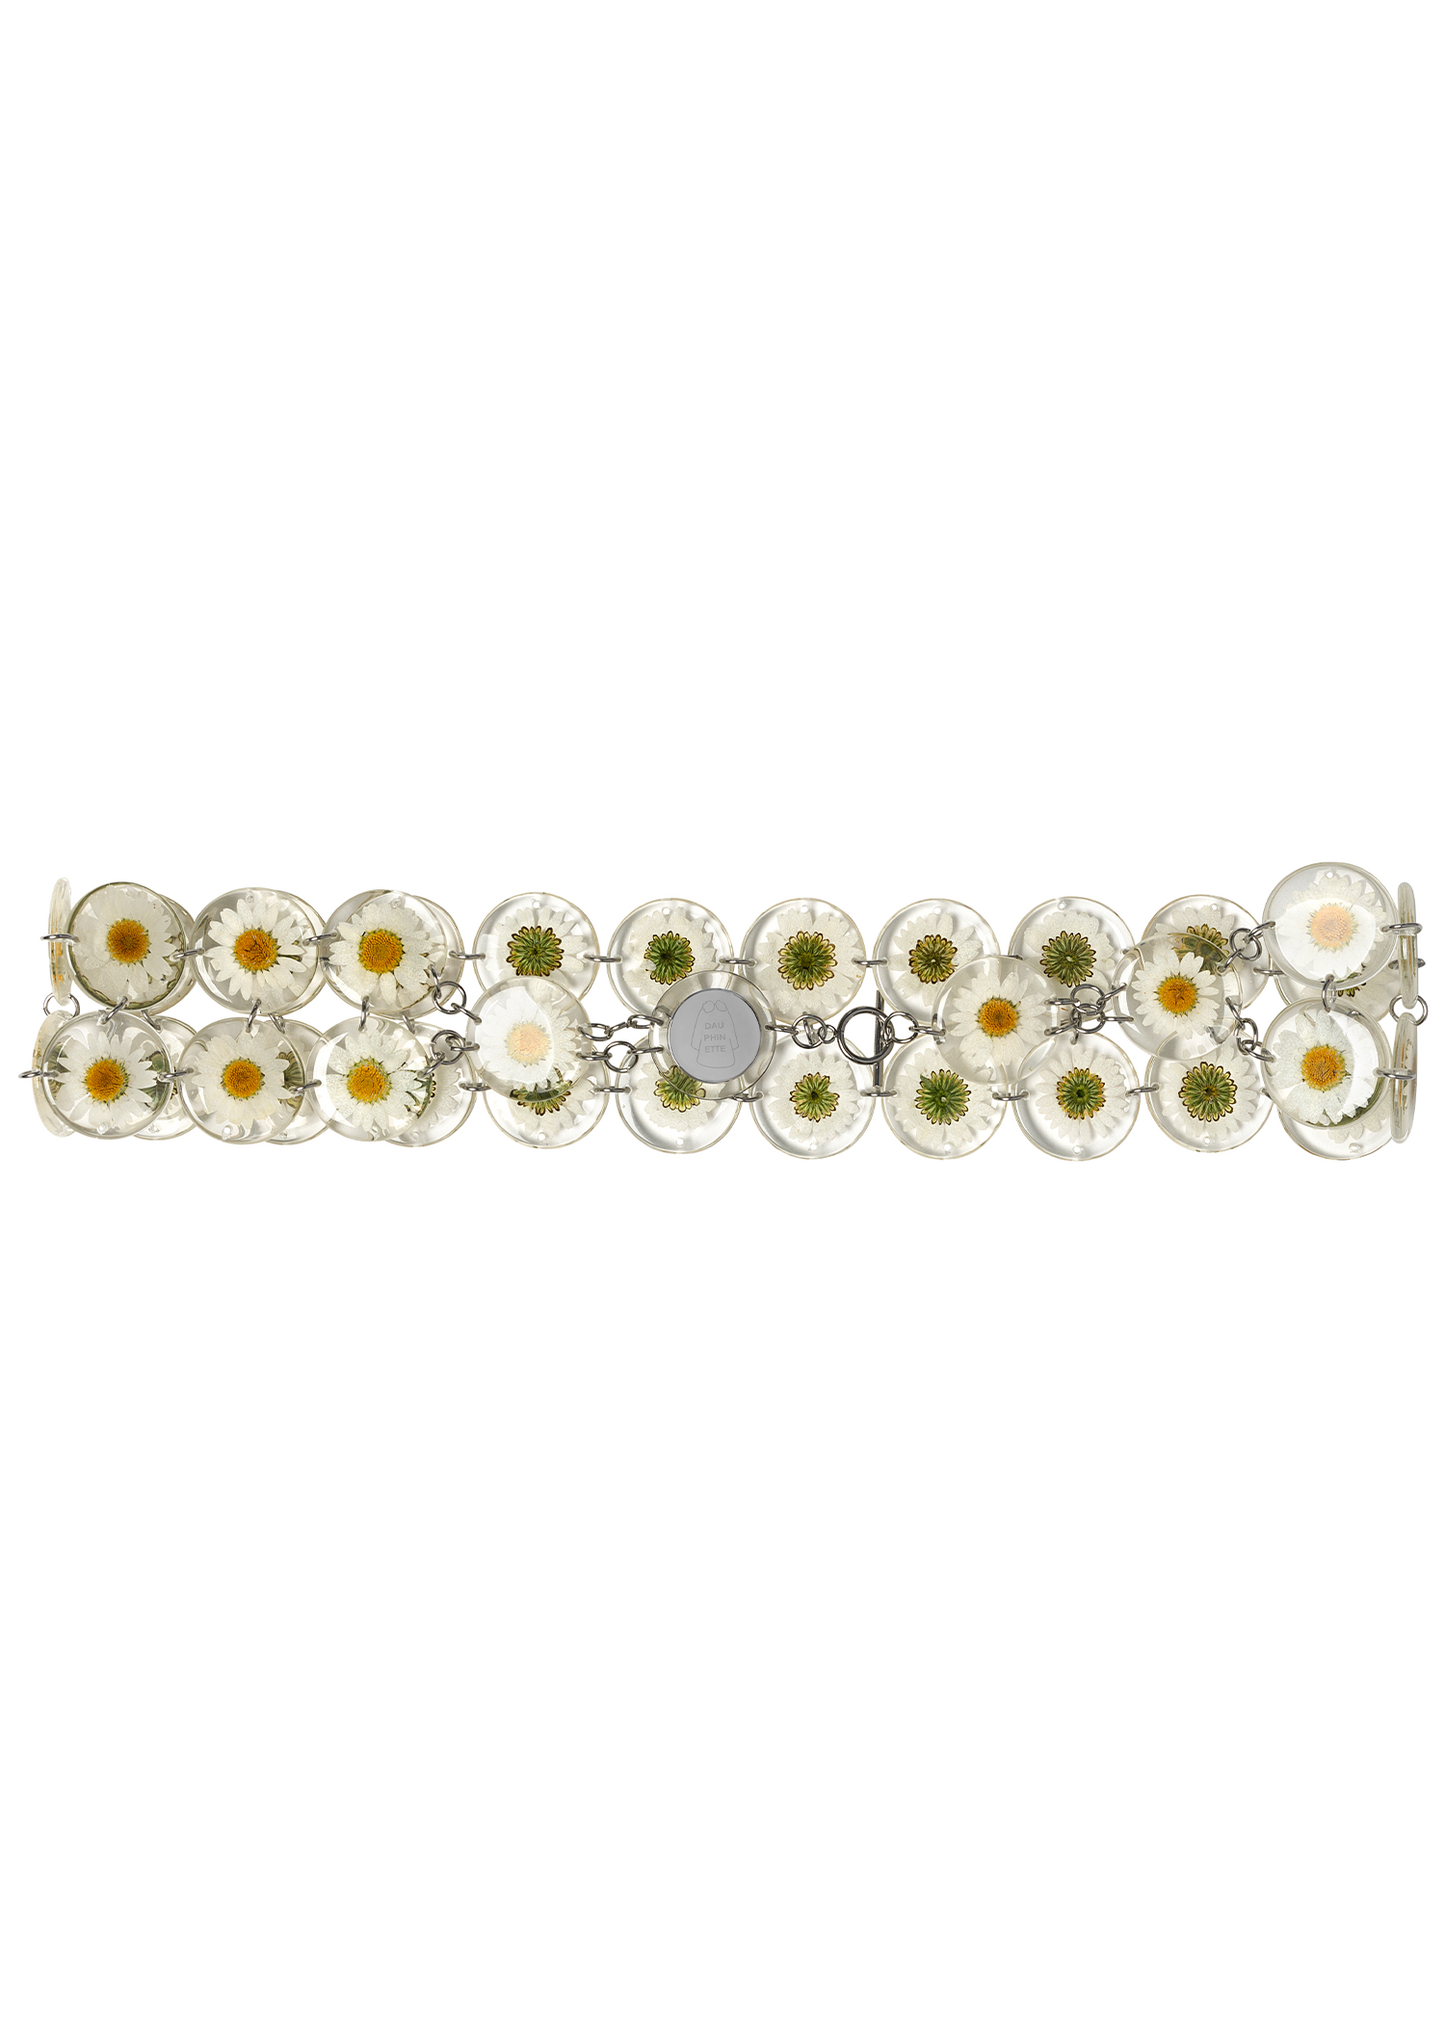 Daisy Chainmaille Belt